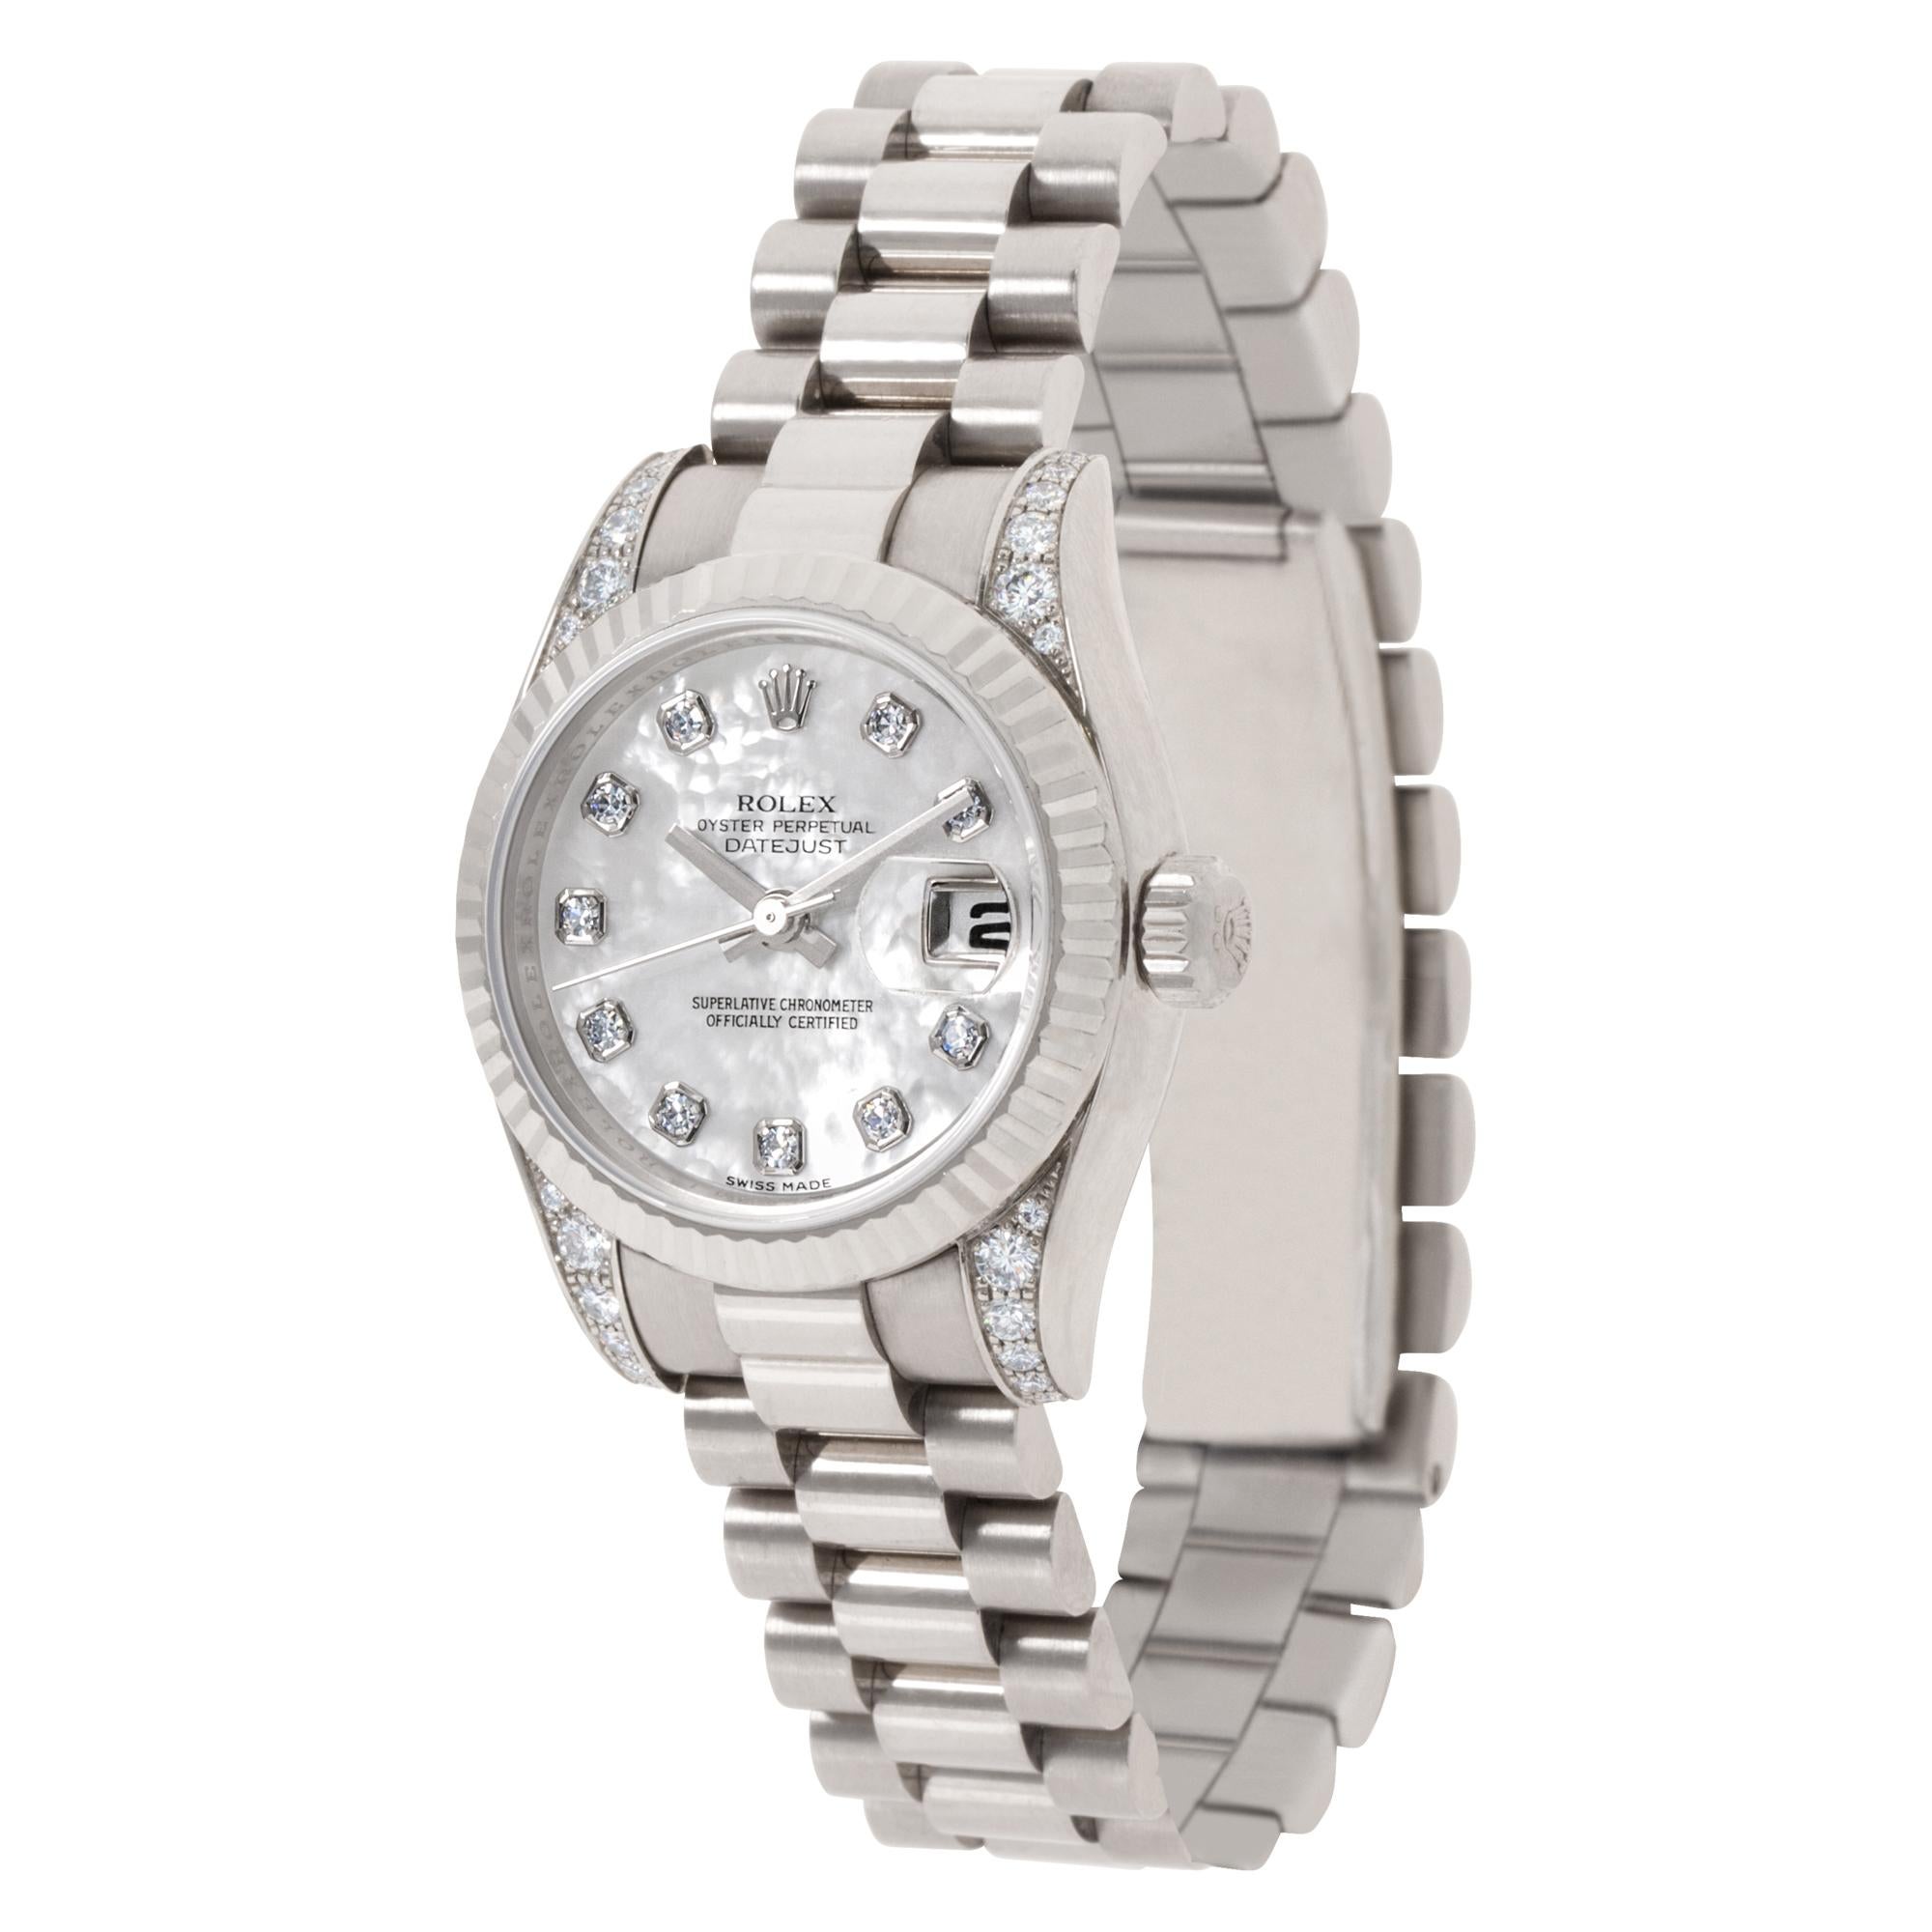 Rolex Datejust in 18k white gold with factory original mother of pearl diamond dial and diamond lugs. Auto w/ sweep seconds and date. 26 mm case size. Circa 2008. Ref 179239. Fine Pre-owned Rolex Watch.

Certified preowned Dress Rolex Datejust